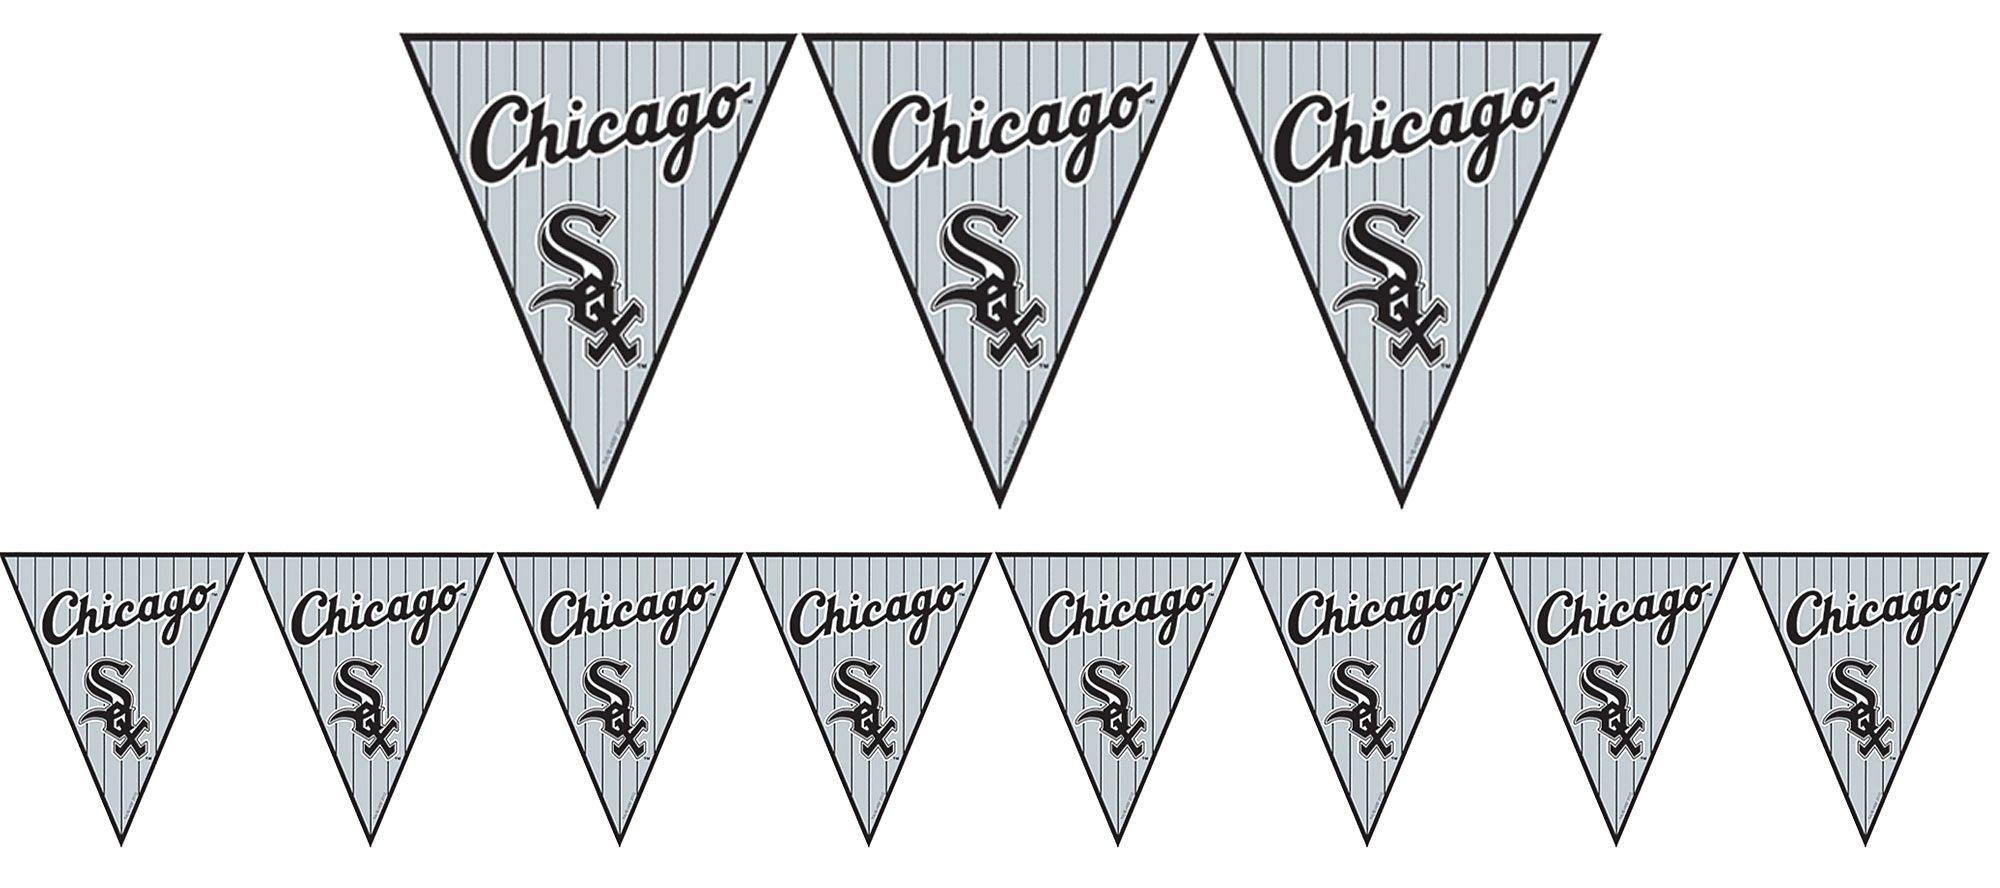 1970 Chicago White Sox Color Picture Pack Baseball - Gallery